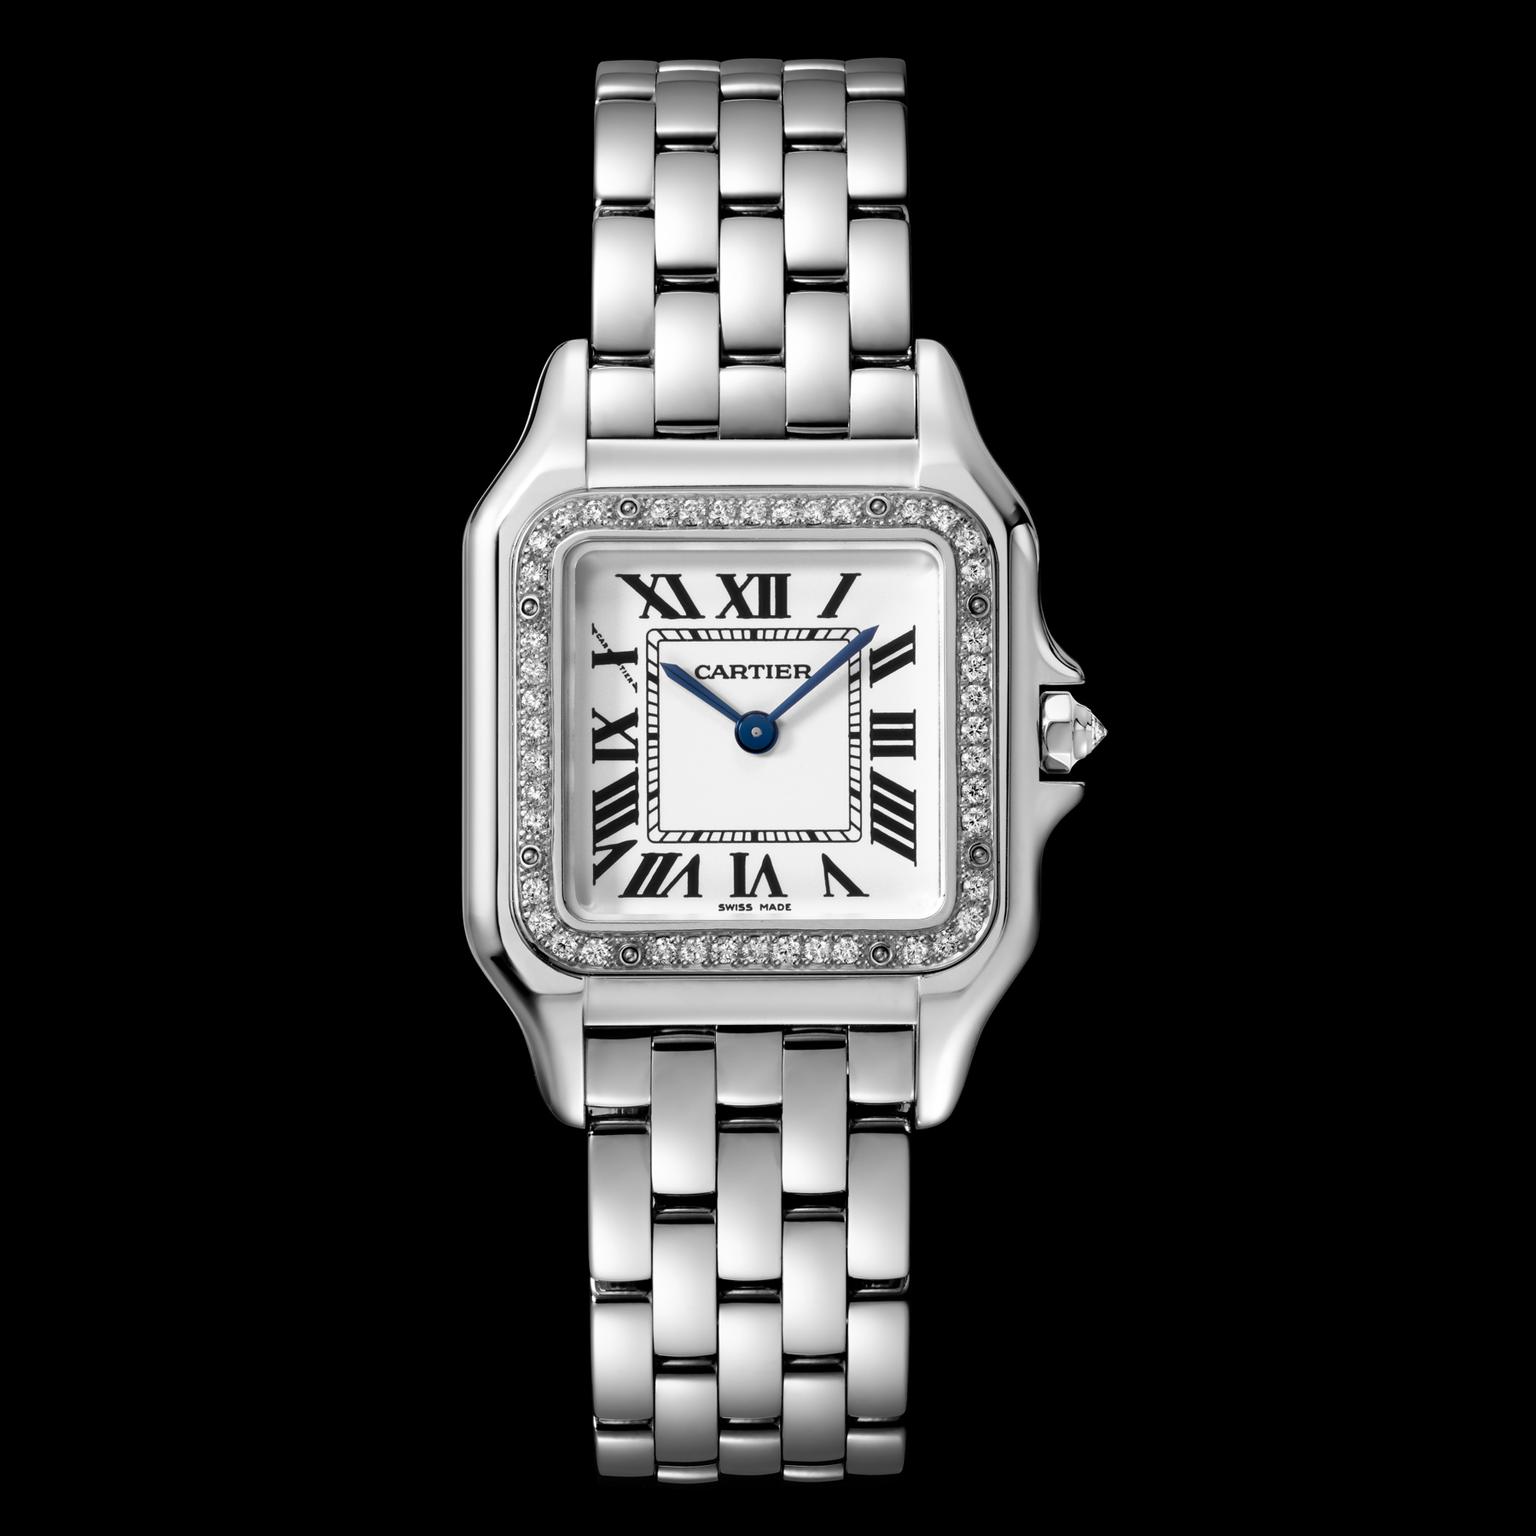 Panthere de Cartier watch in white gold with diamonds